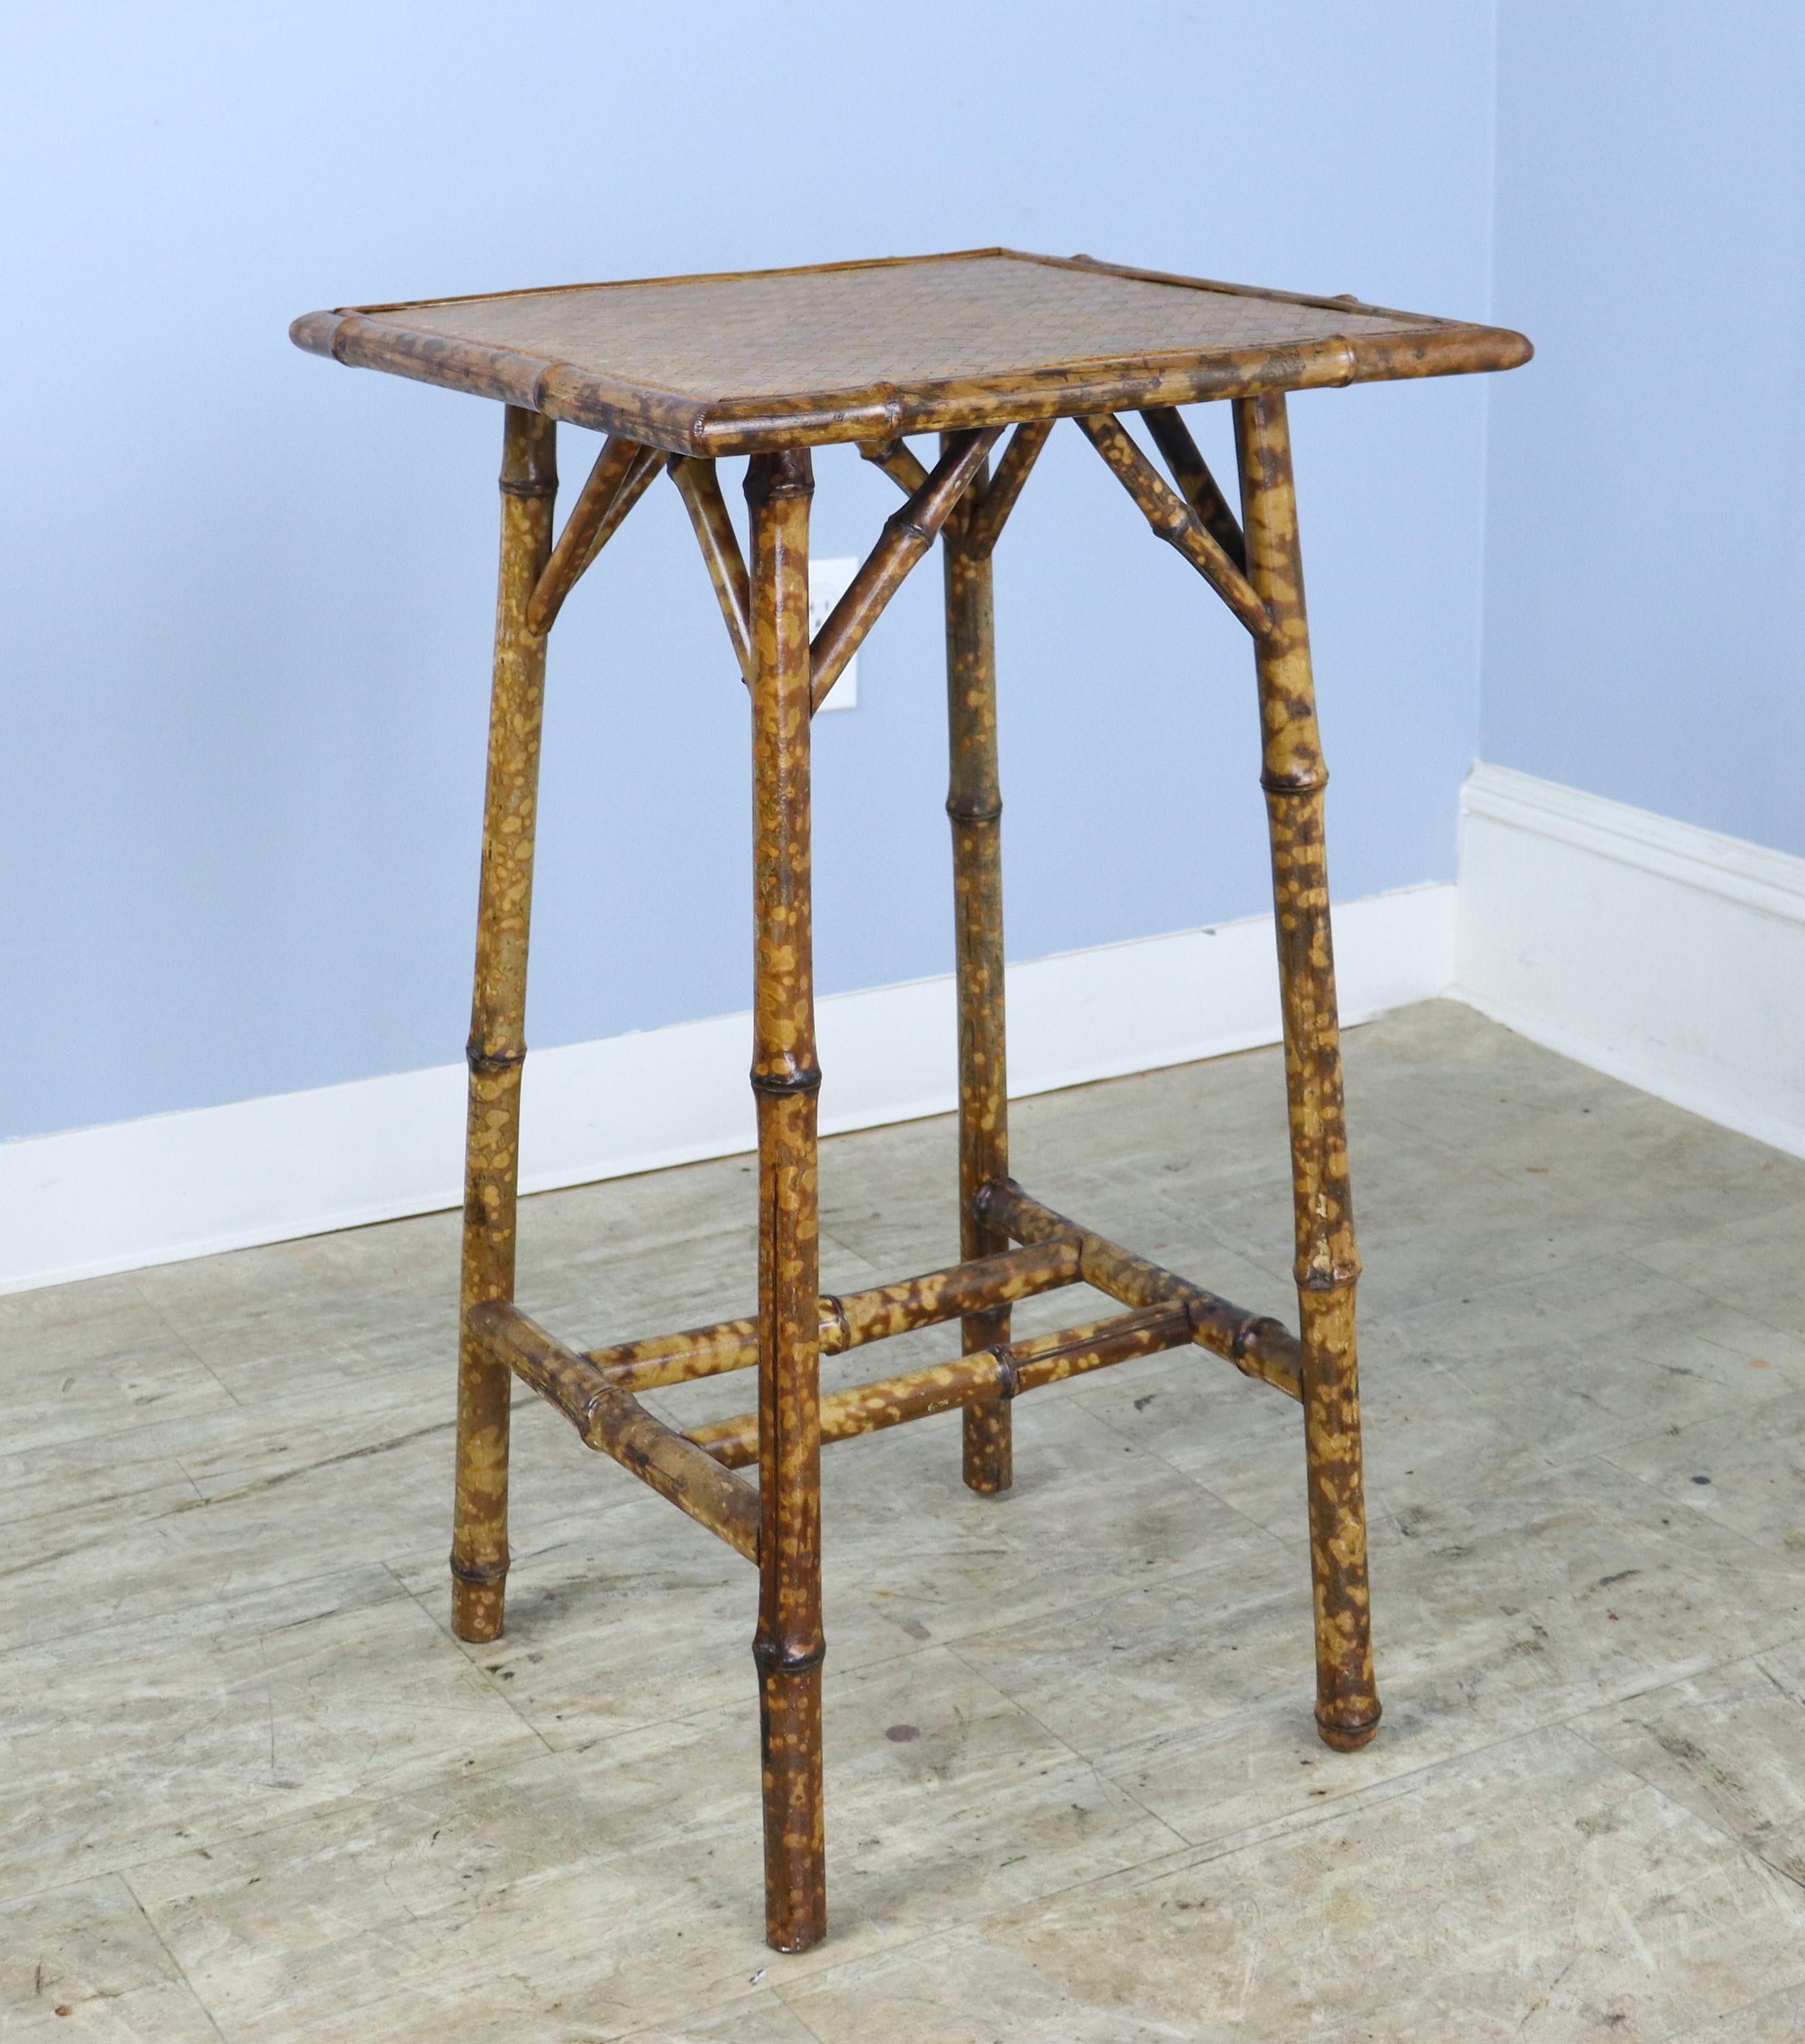 A charming bamboo side table with square top made of rattan in very good condition. Sturdy, and the bamboo is vibrantly colored and well constructed.